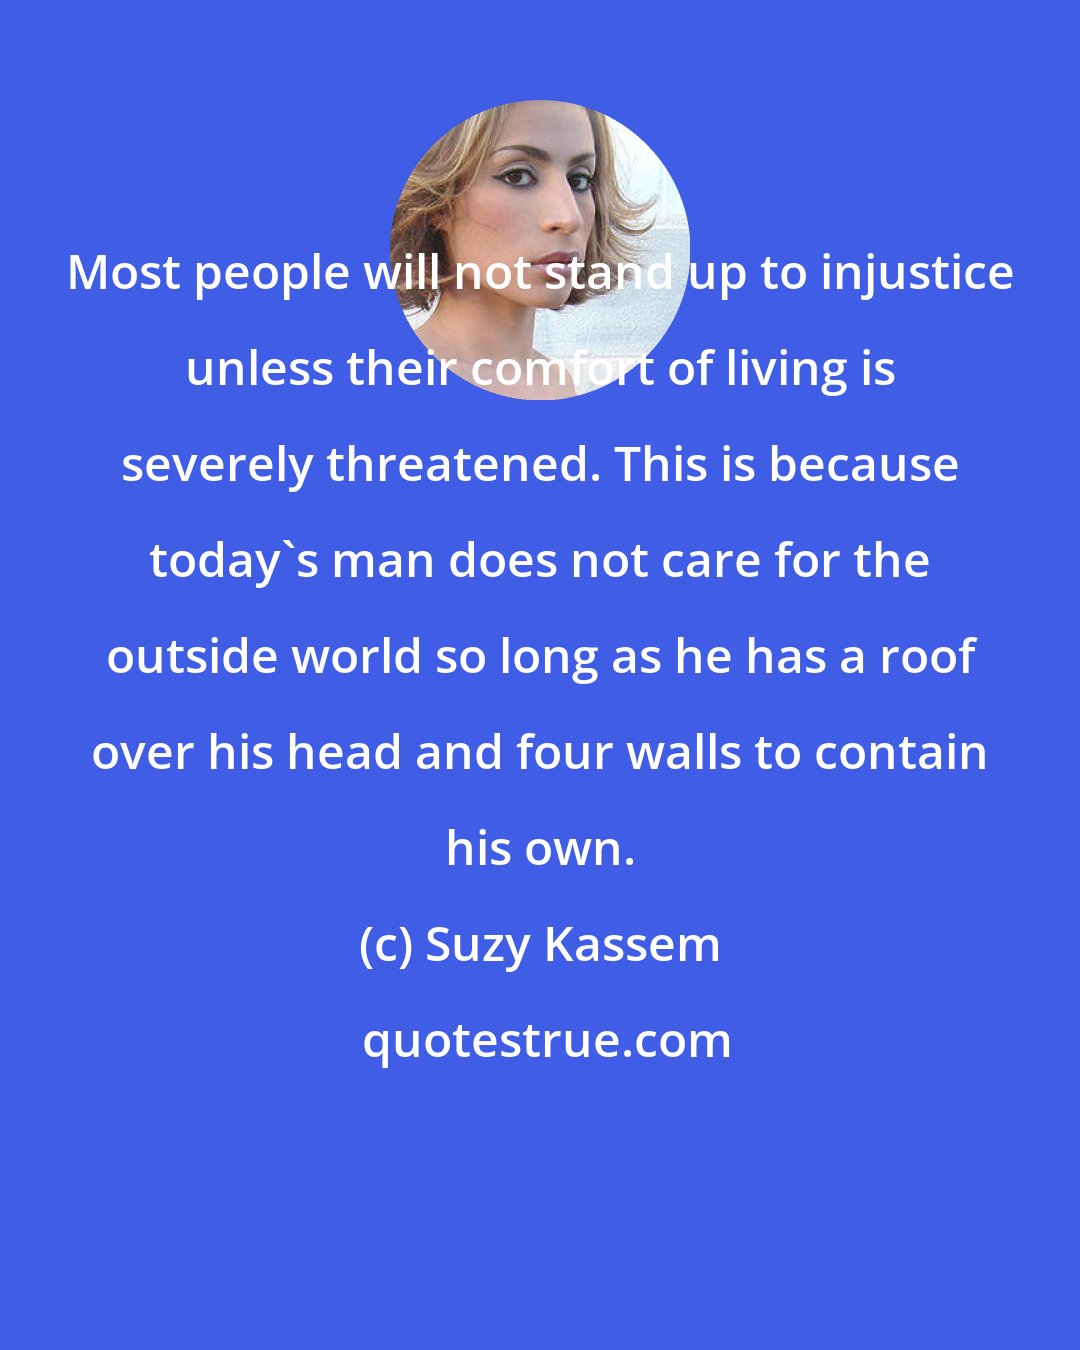 Suzy Kassem: Most people will not stand up to injustice unless their comfort of living is severely threatened. This is because today's man does not care for the outside world so long as he has a roof over his head and four walls to contain his own.